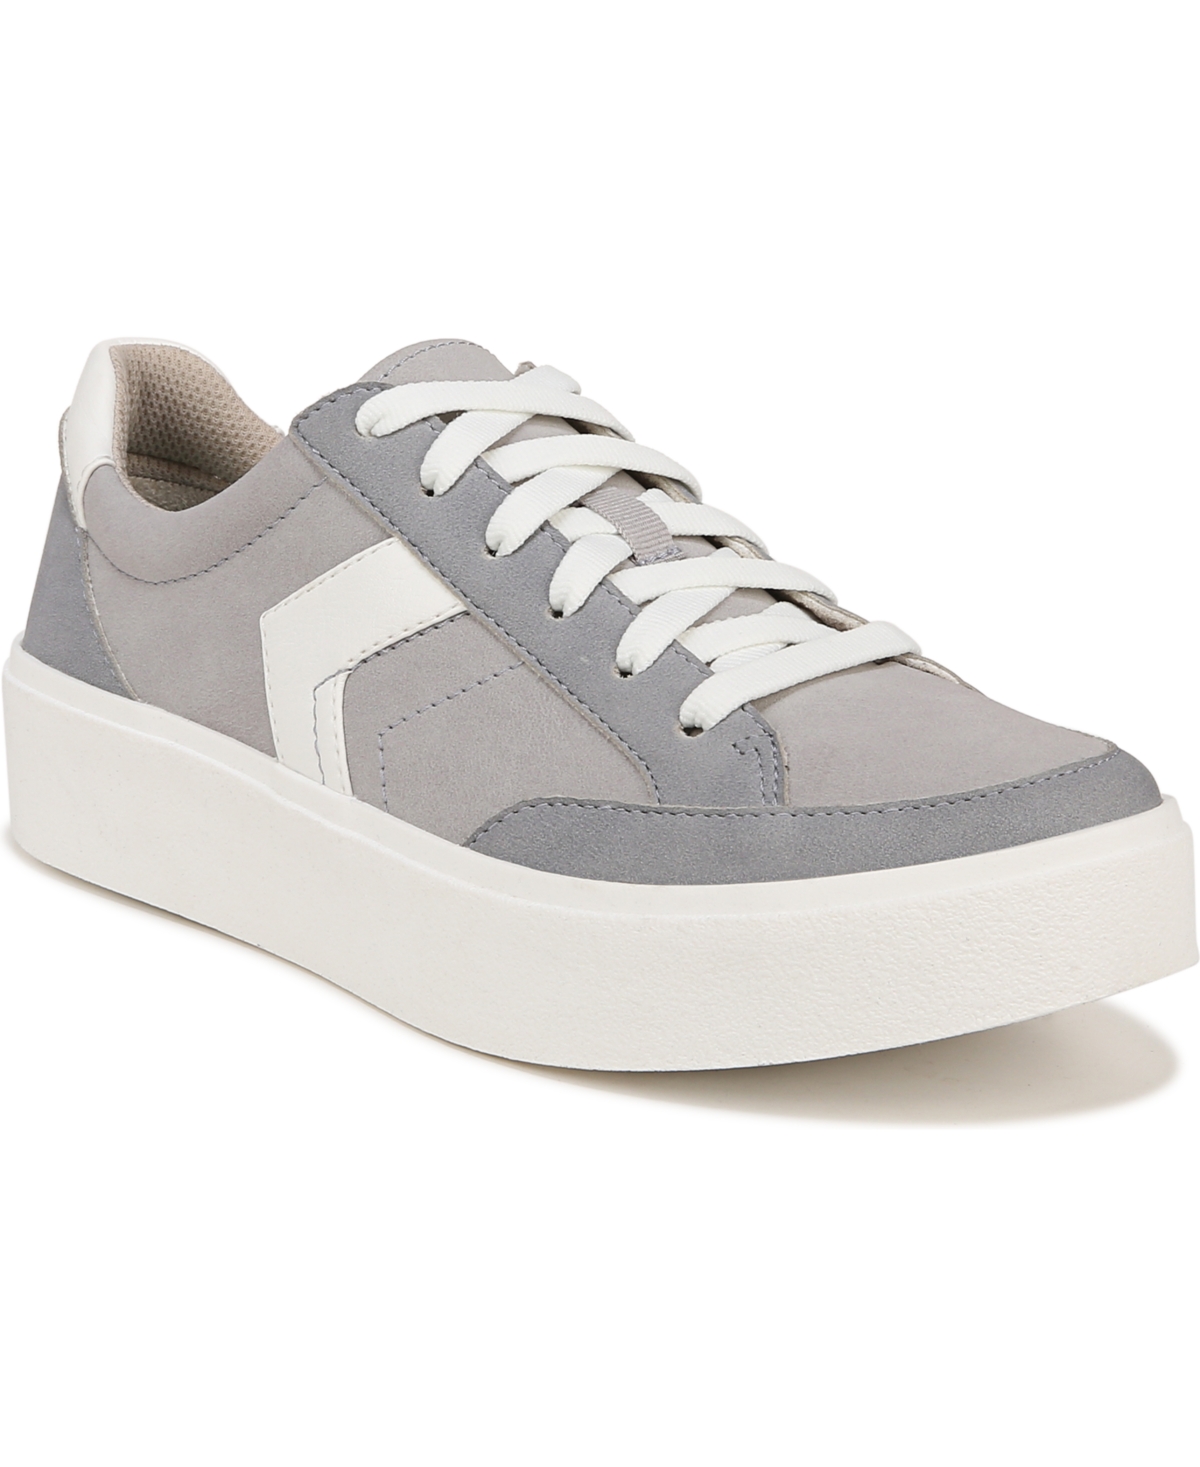 Dr. Scholl's Women's Madison-lace Sneakers In Grey Microfiber